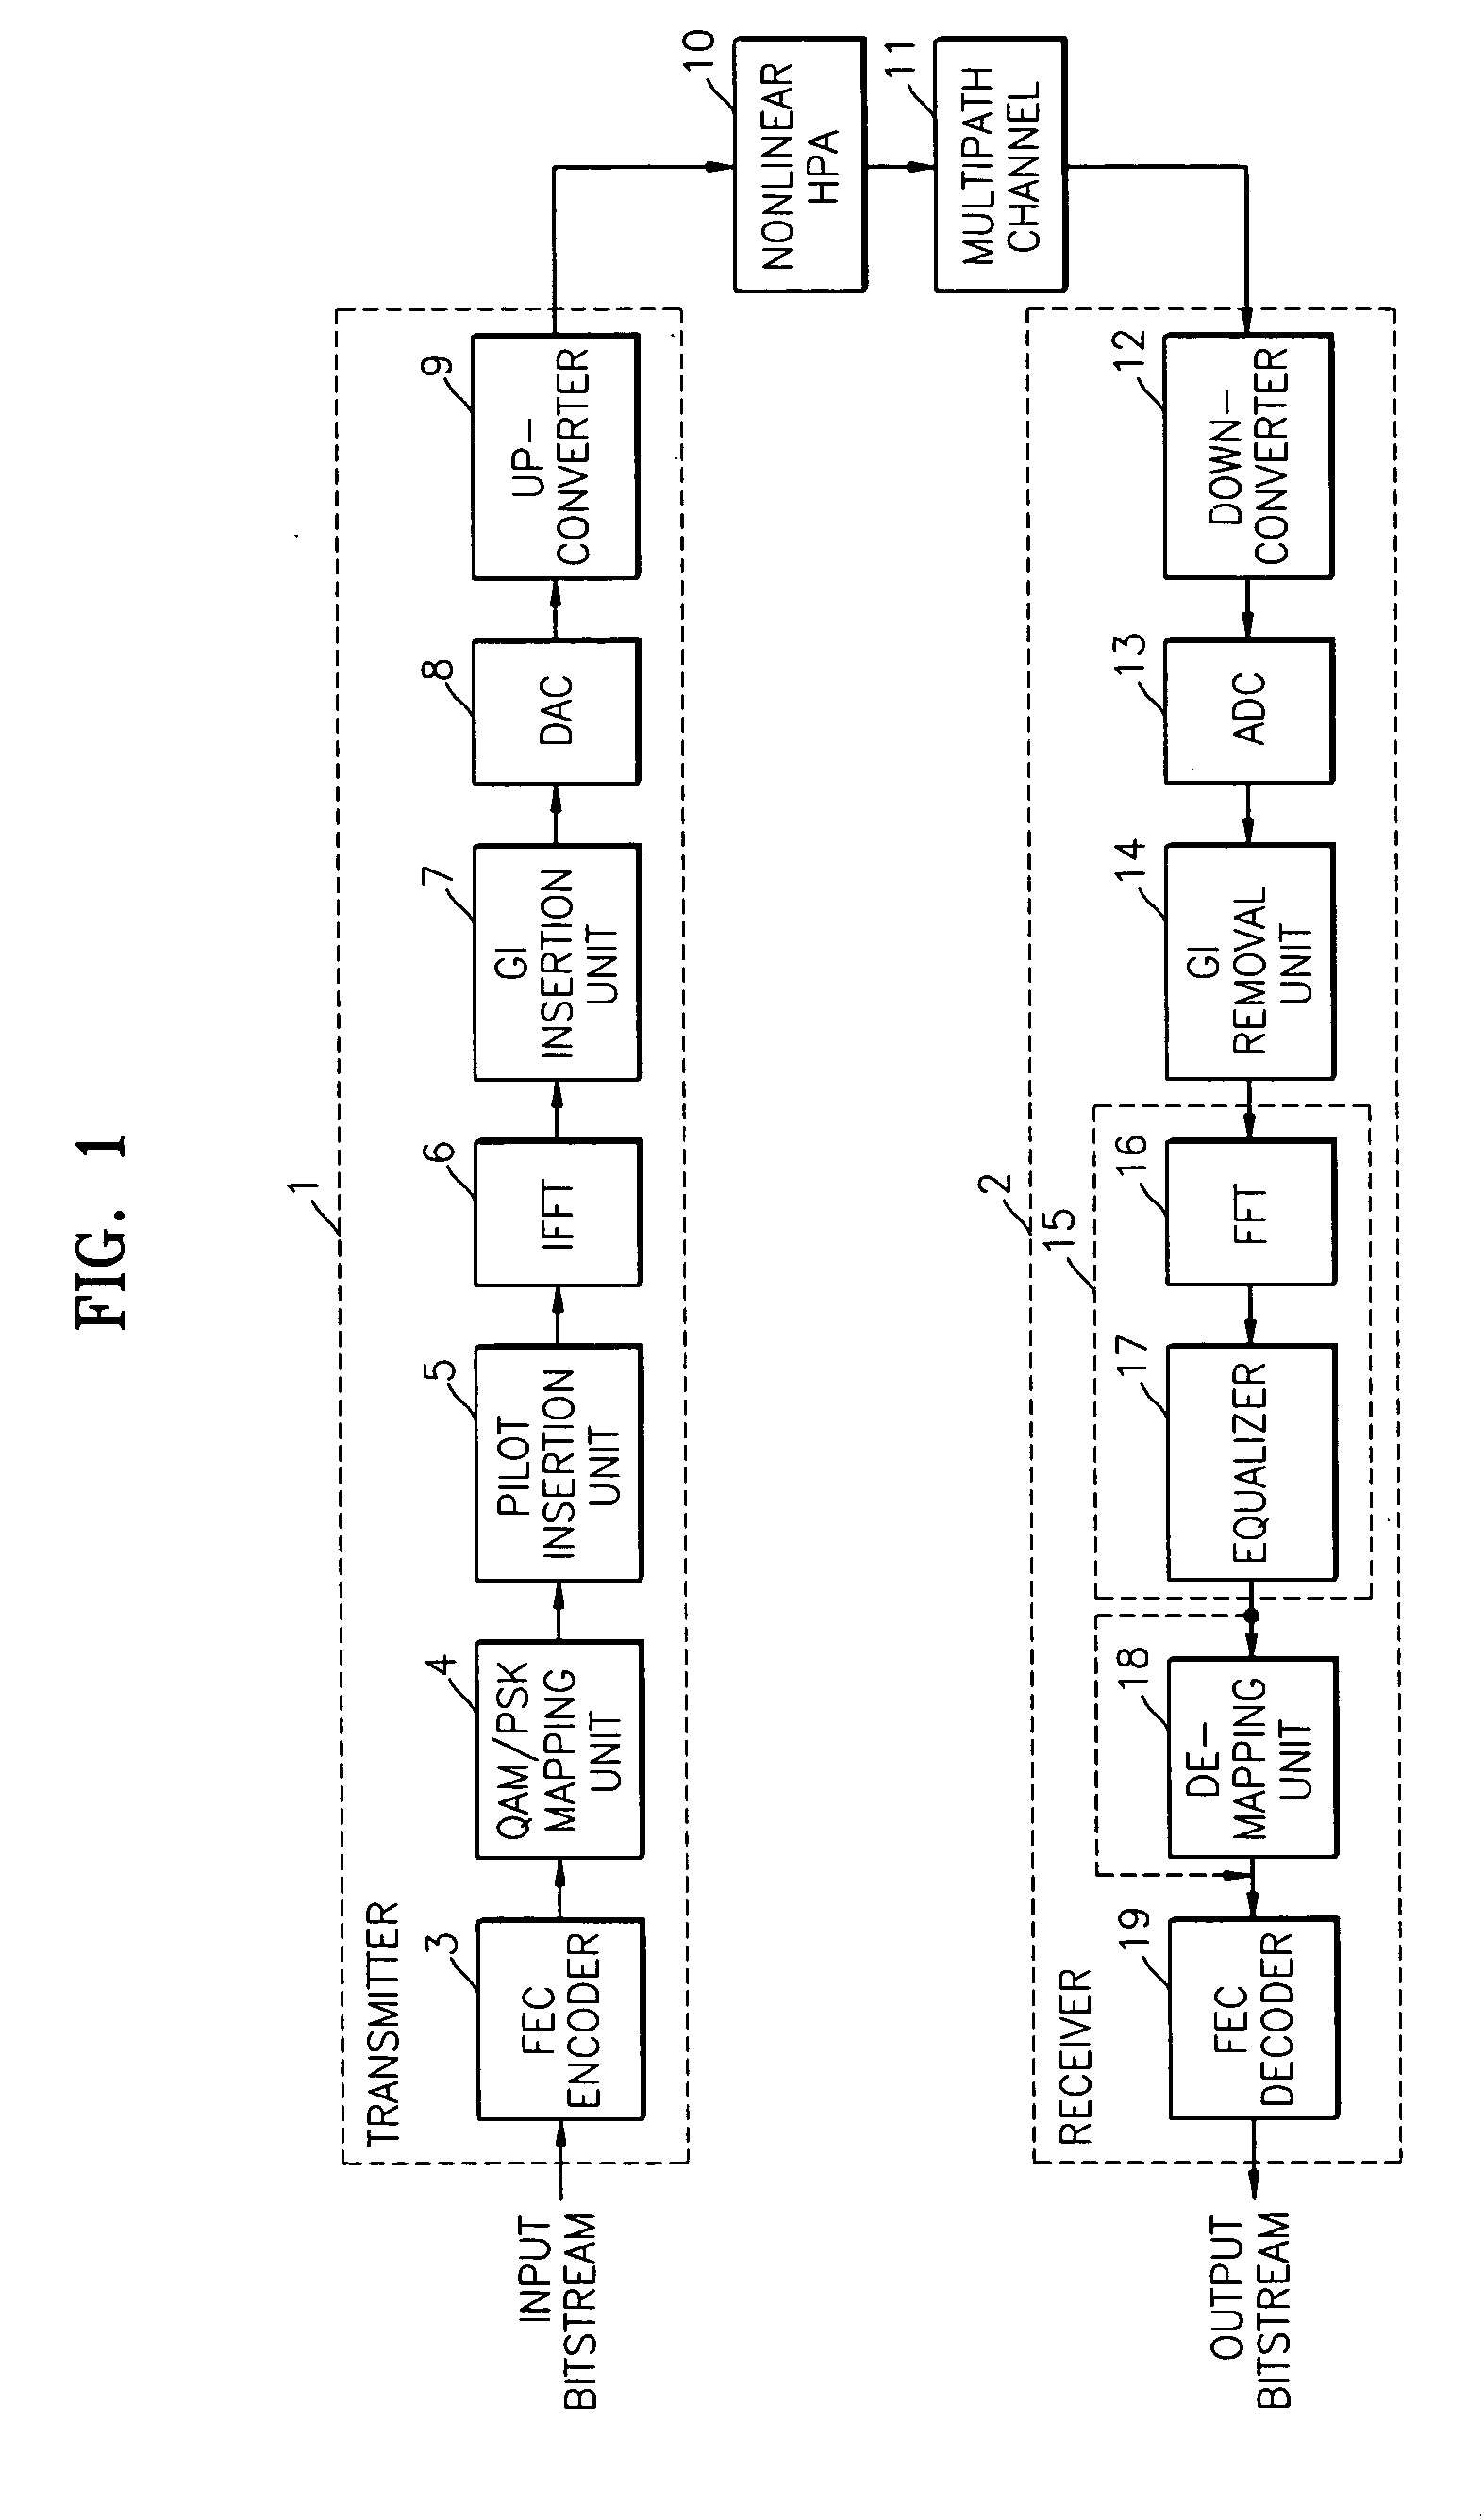 Receiver for compensating nonlinearly distorted multicarrier signals